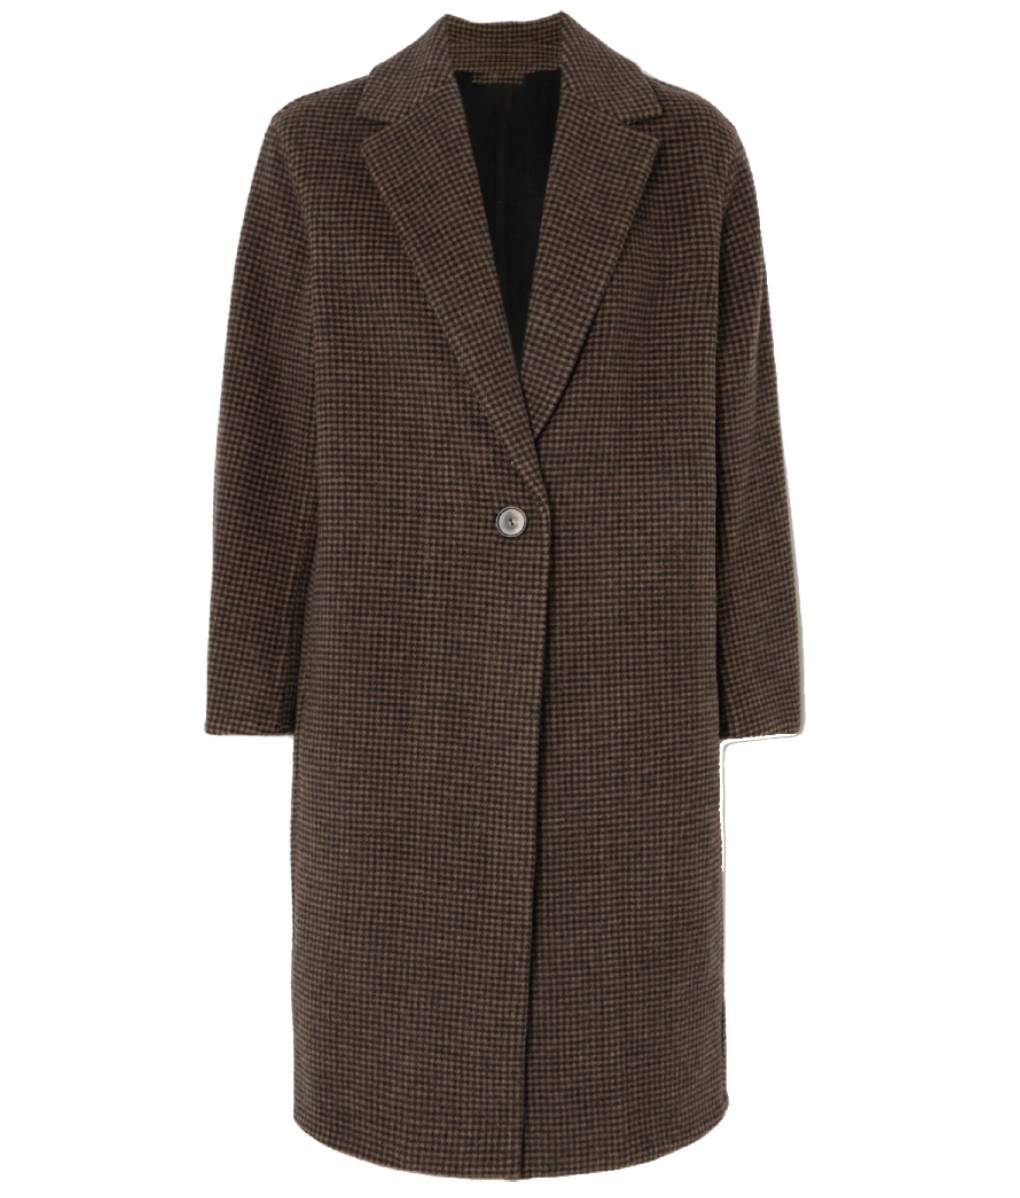 Taylor Swift Brown Trench Coat - Taylor Swift Brown Coat